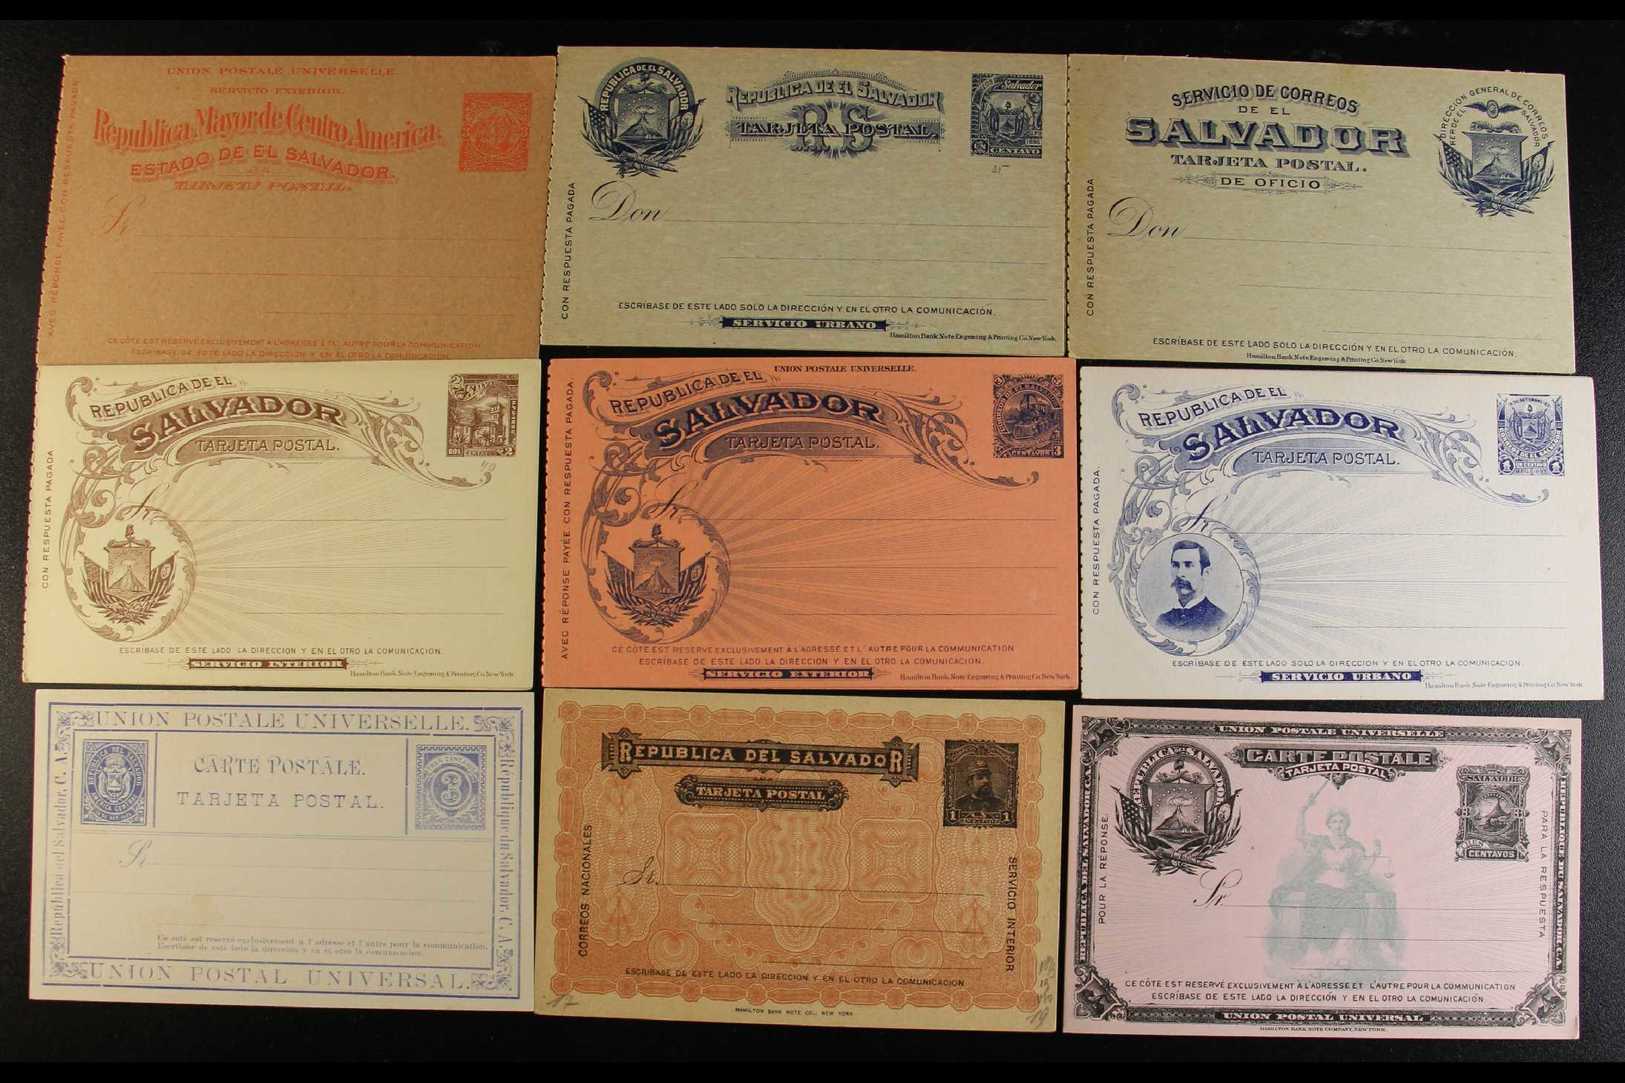 1882-1912 POSTAL STATIONERY Unused Range Of POSTCARDS & REPLY CARDS With A Strong Range Of Issued Types & Denominations, - El Salvador